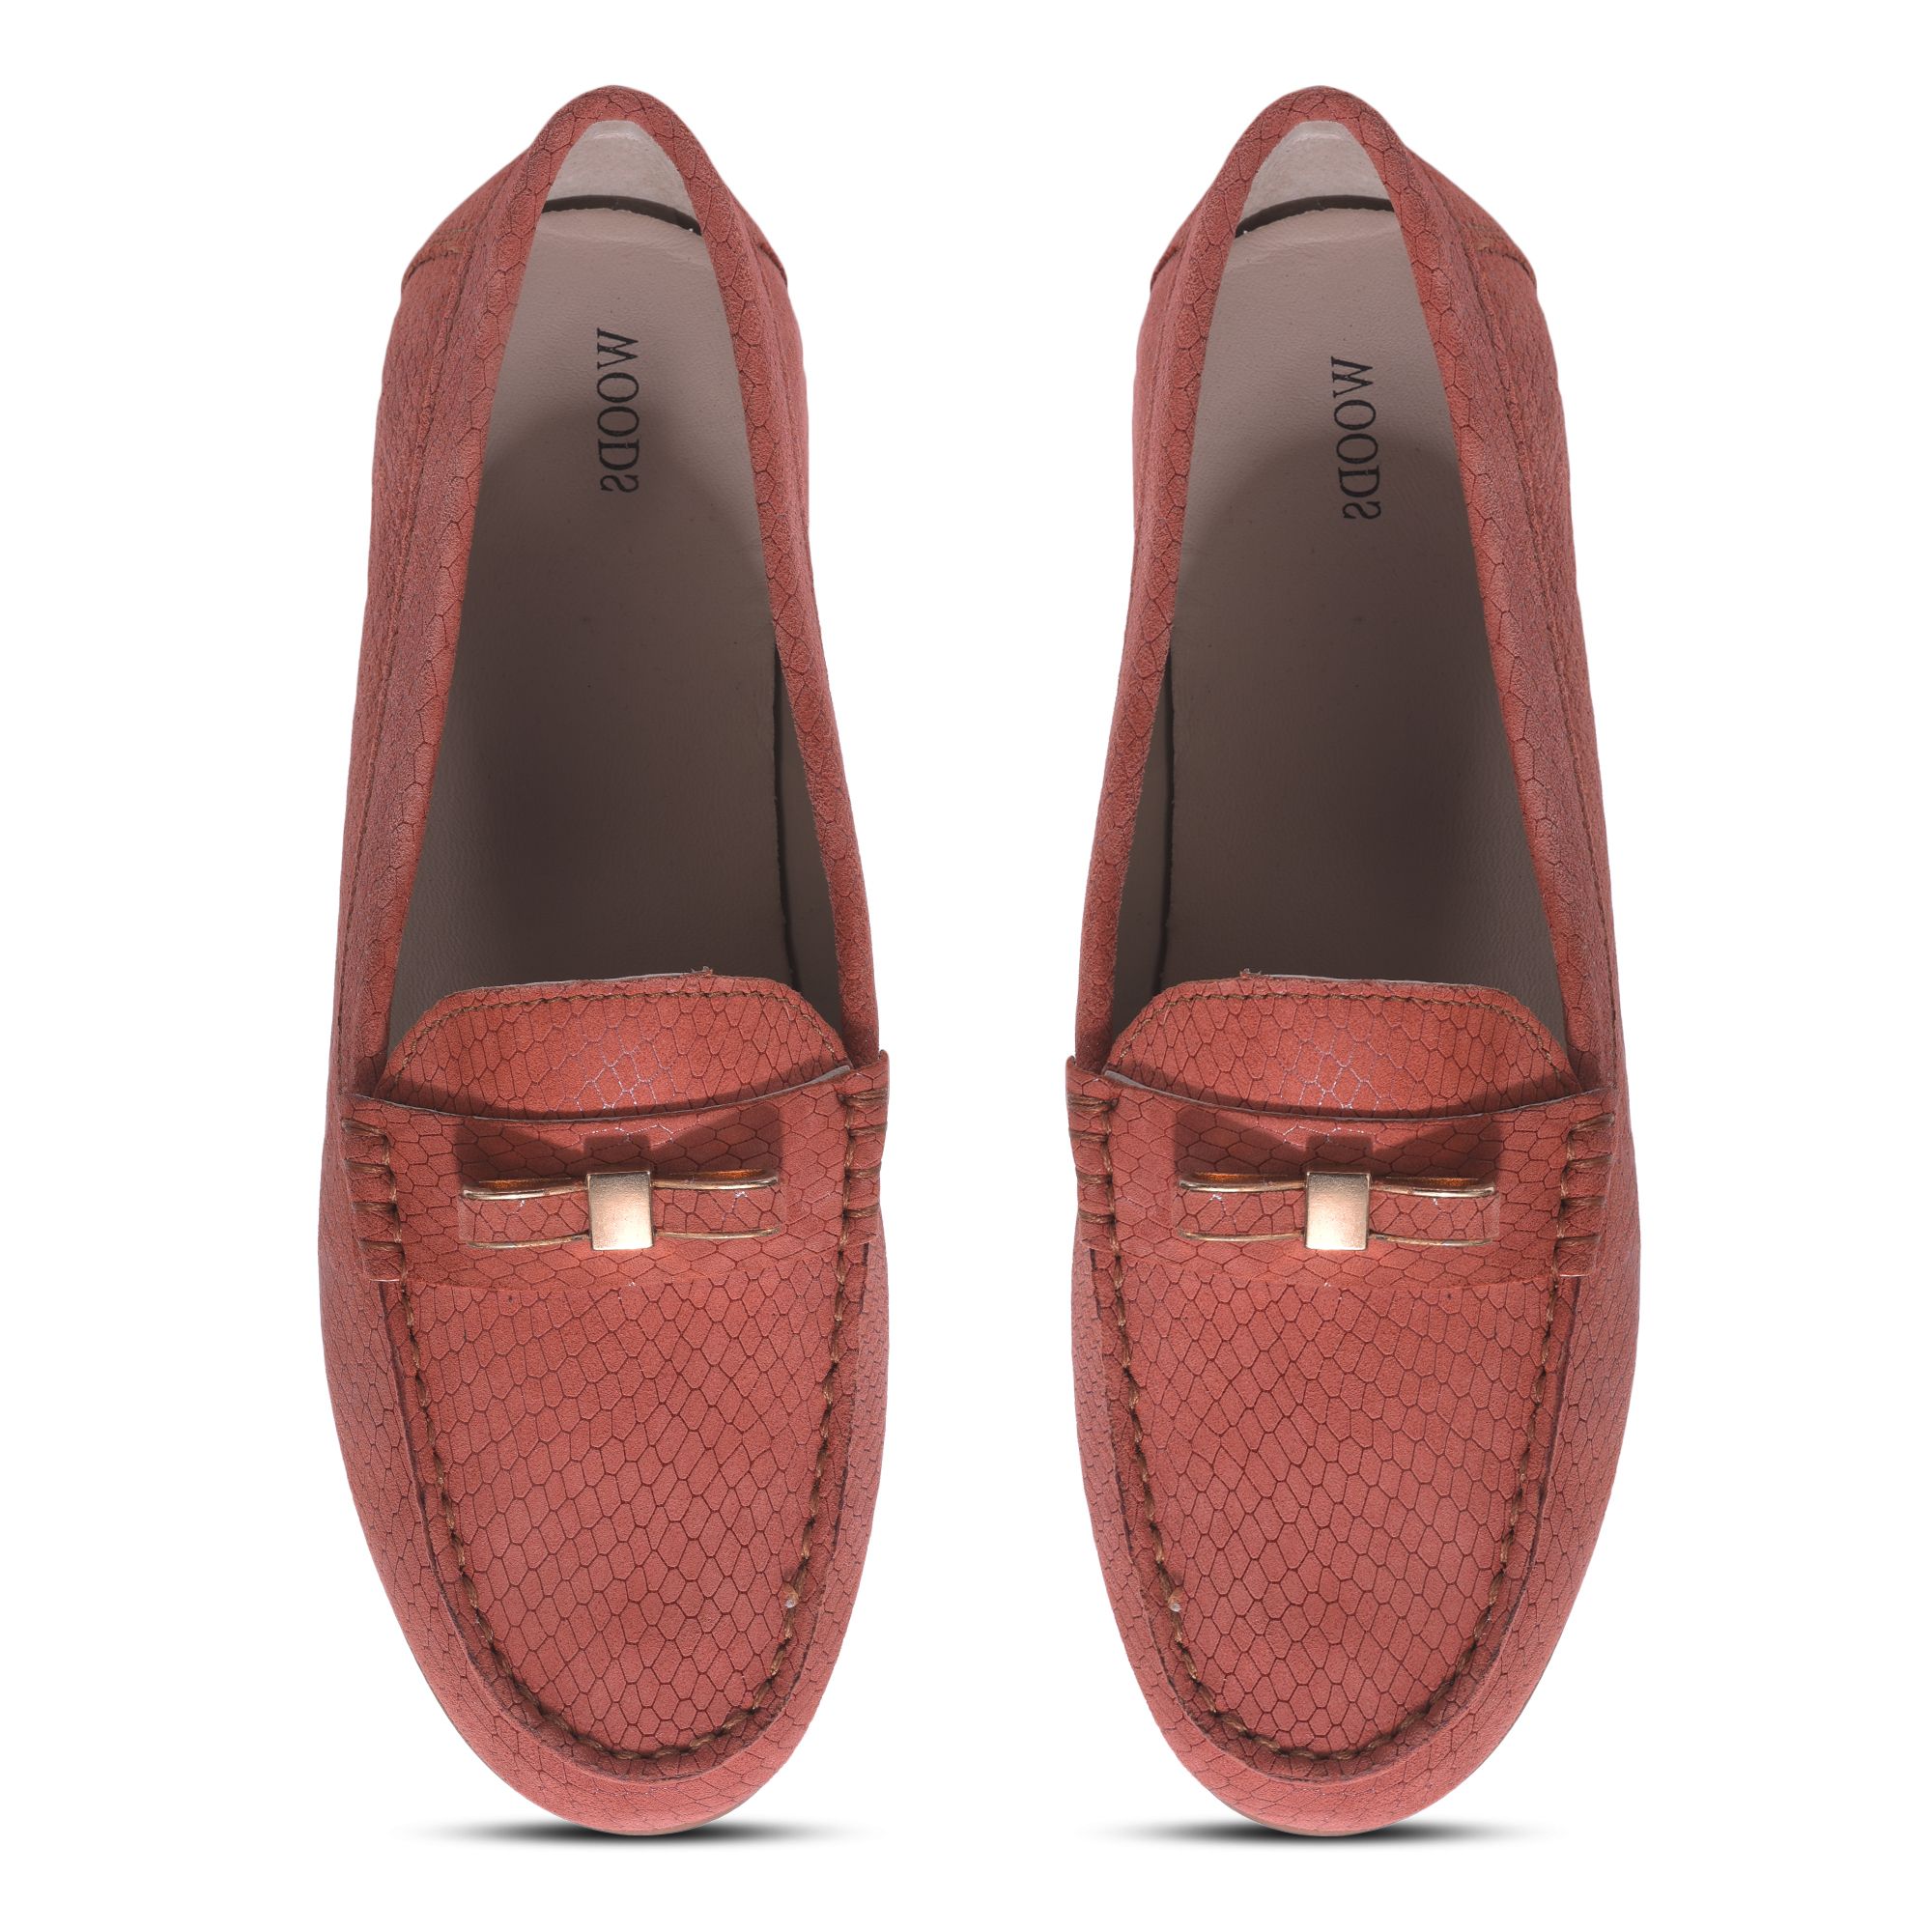 PEACH moccasins for women